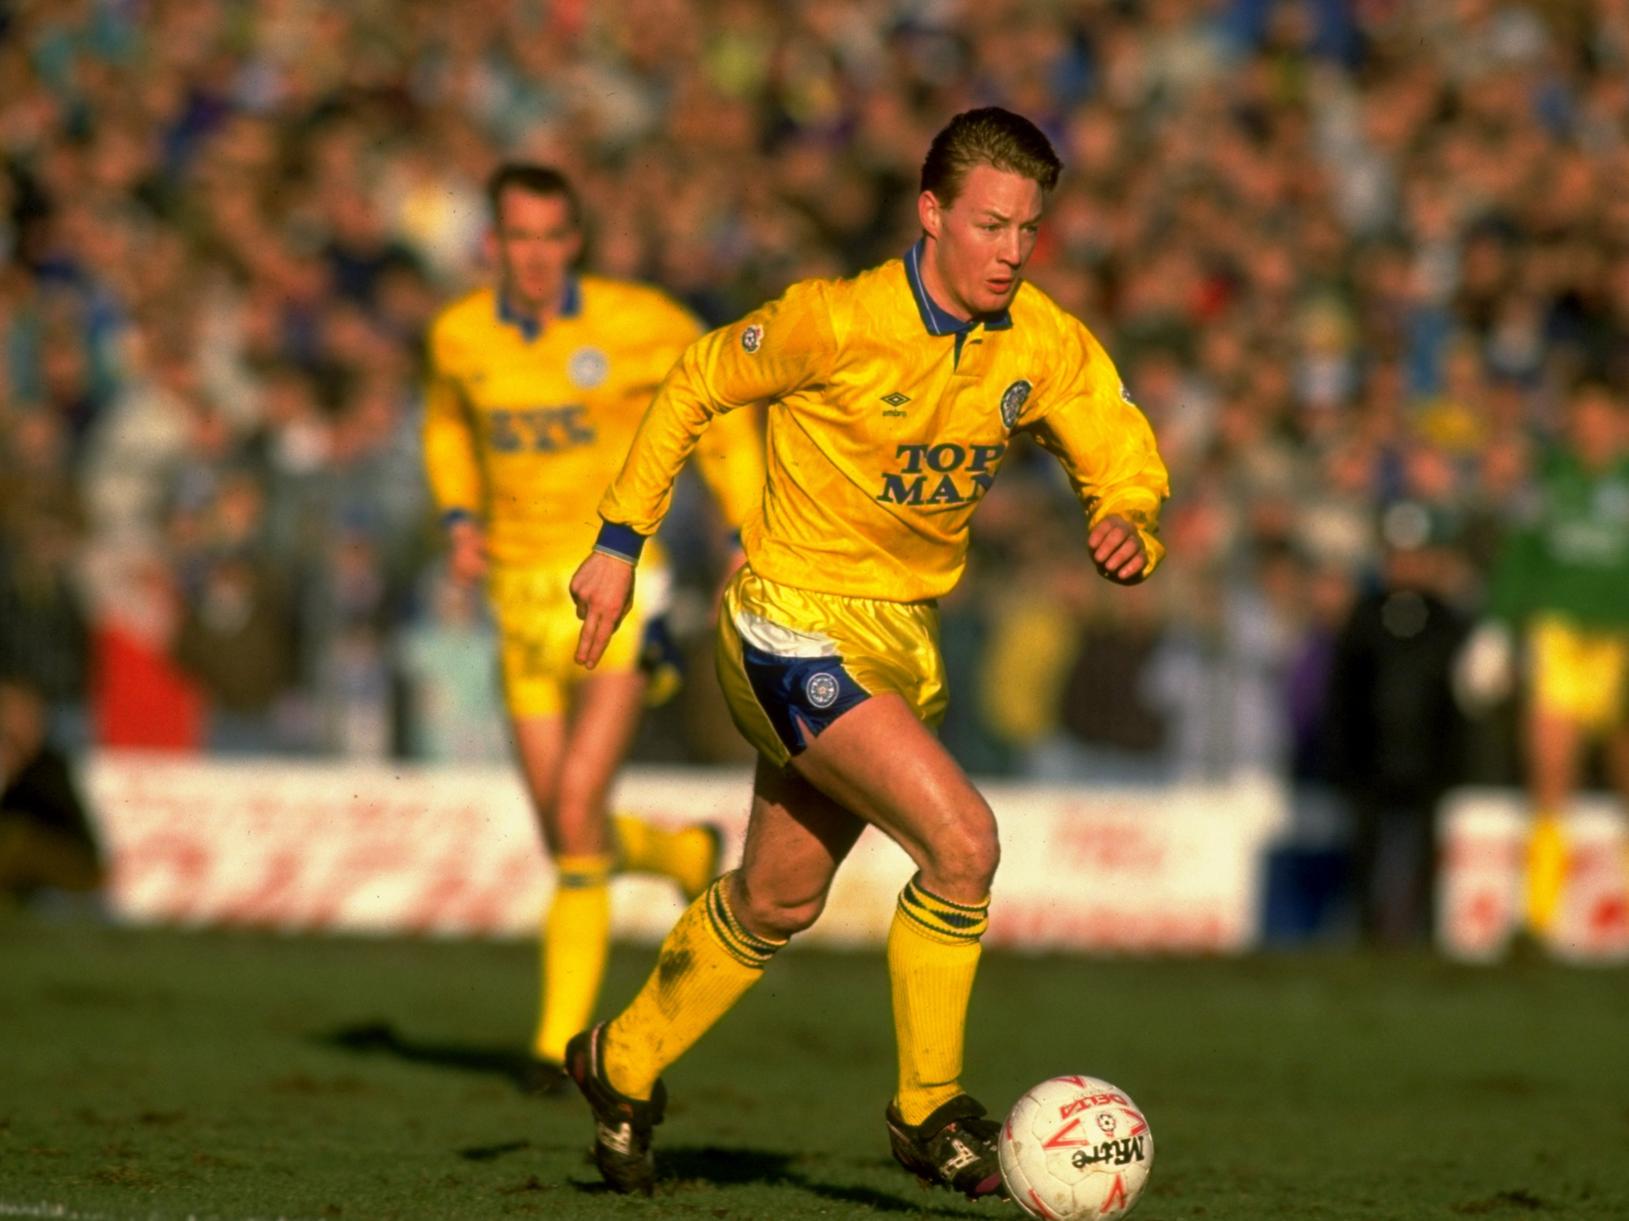 Made his Leeds debut at 18 and quickly earned a reputation as a fiercely competitive midfielder in the mould of Whites legend Billy Bremner.